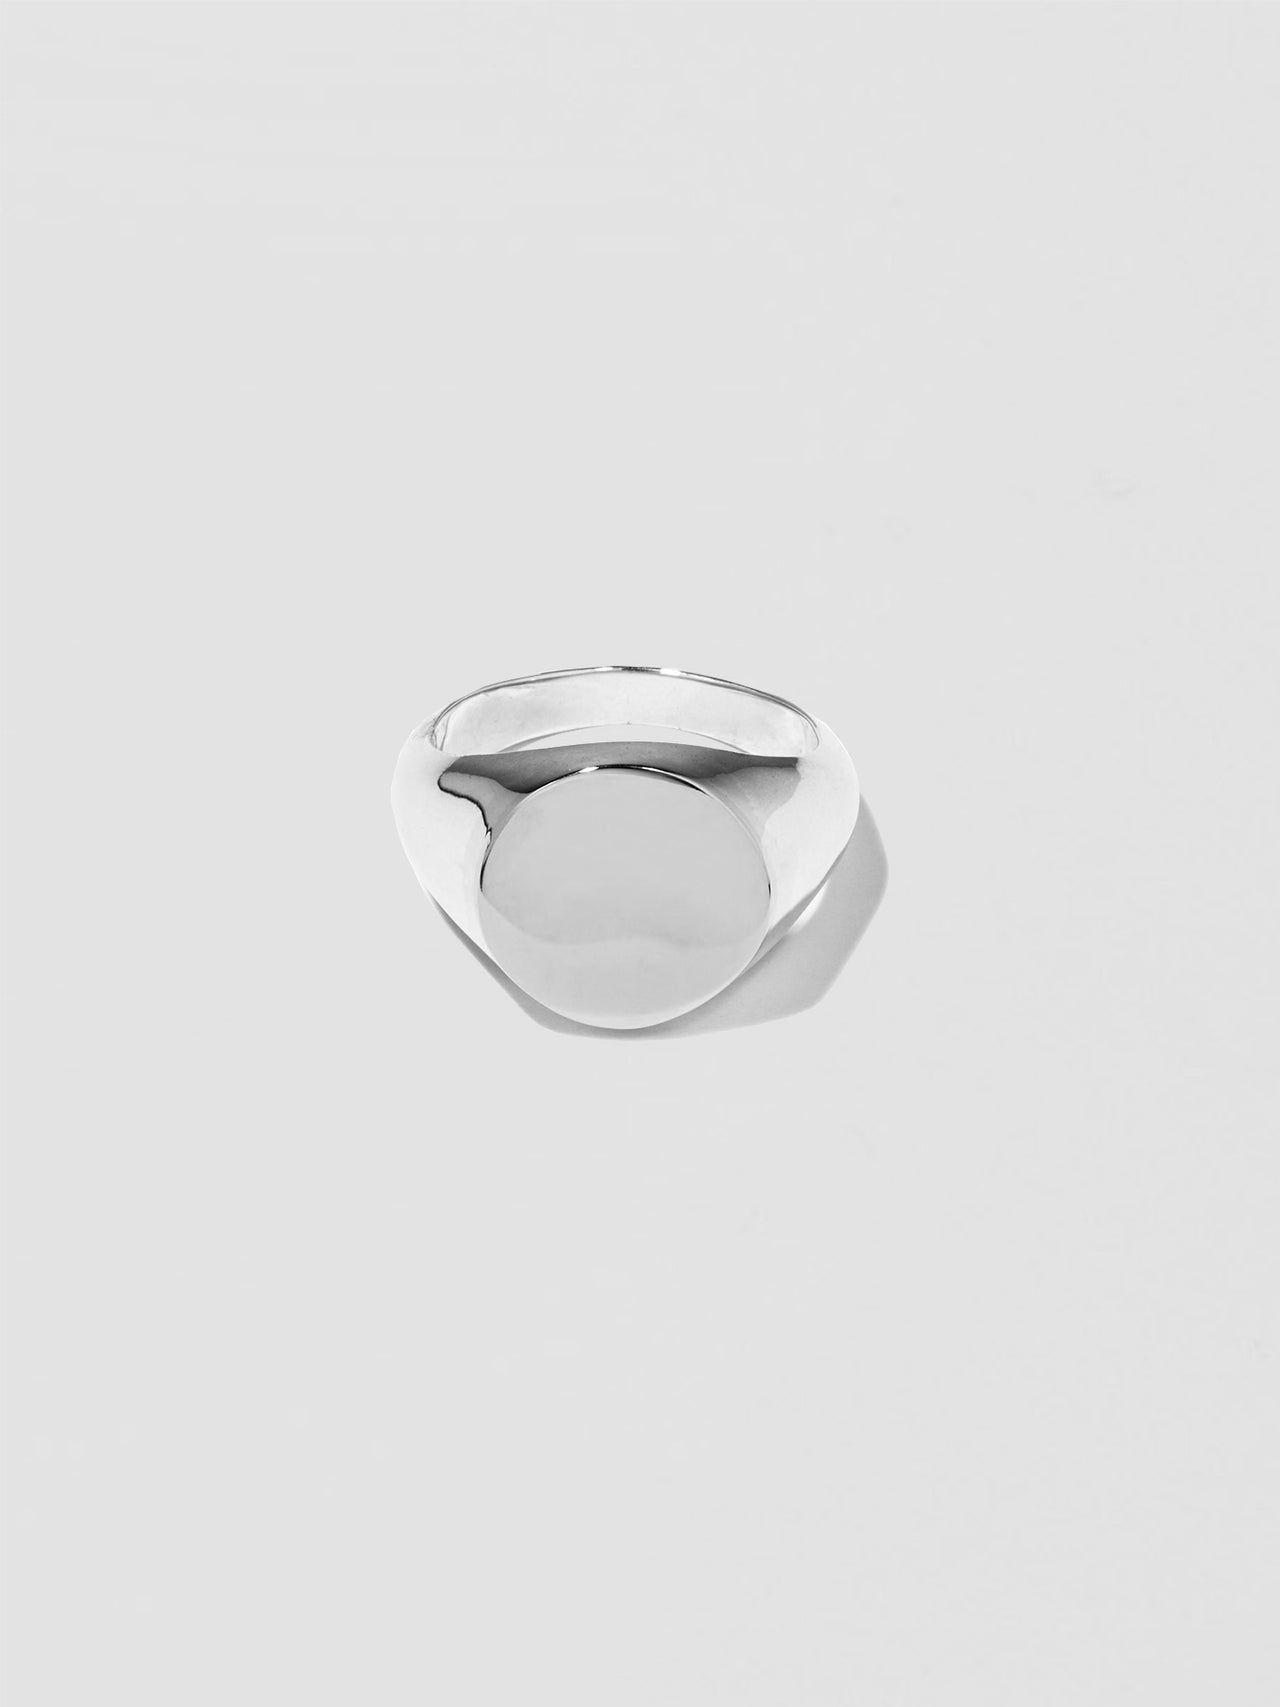 FACE Ring(Silver) XL(19号)